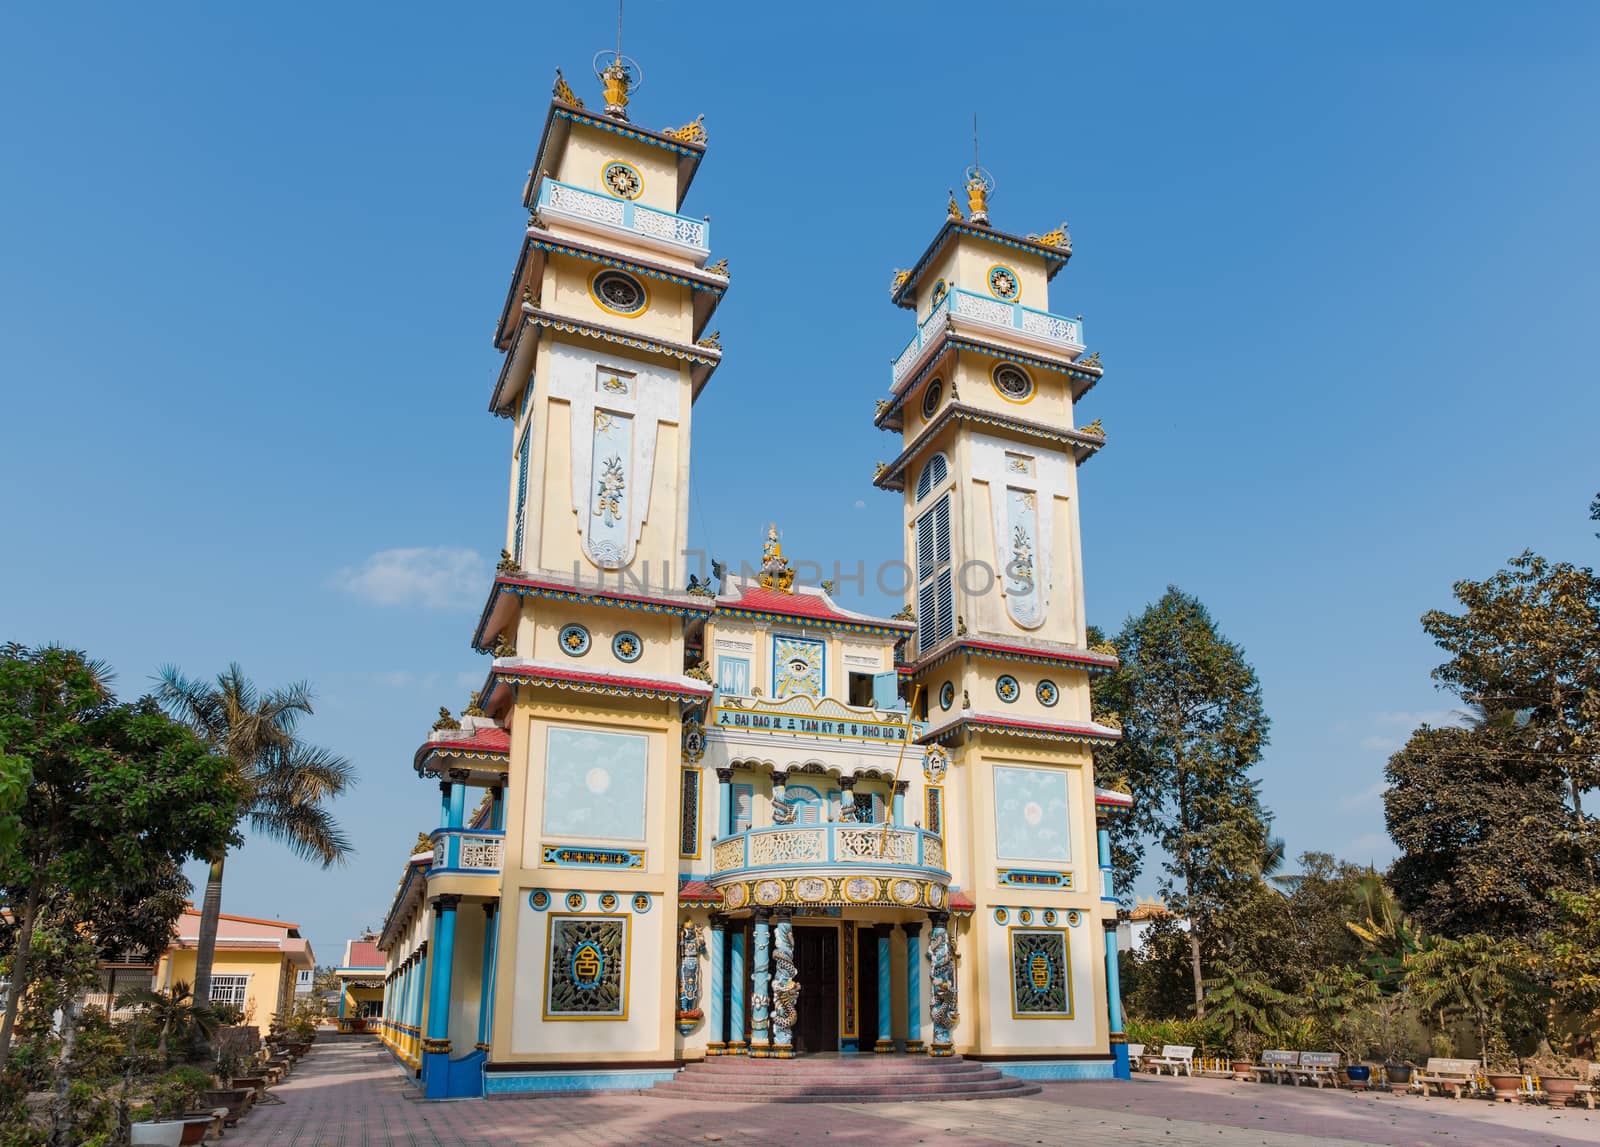 Cao Dai temple in Cao Lanh, the capital of Dong Thap Province in Vietnam. Cao Dai is a Vietnamese monotheistic religion with around 6 million followers, mostly in Vietnam.